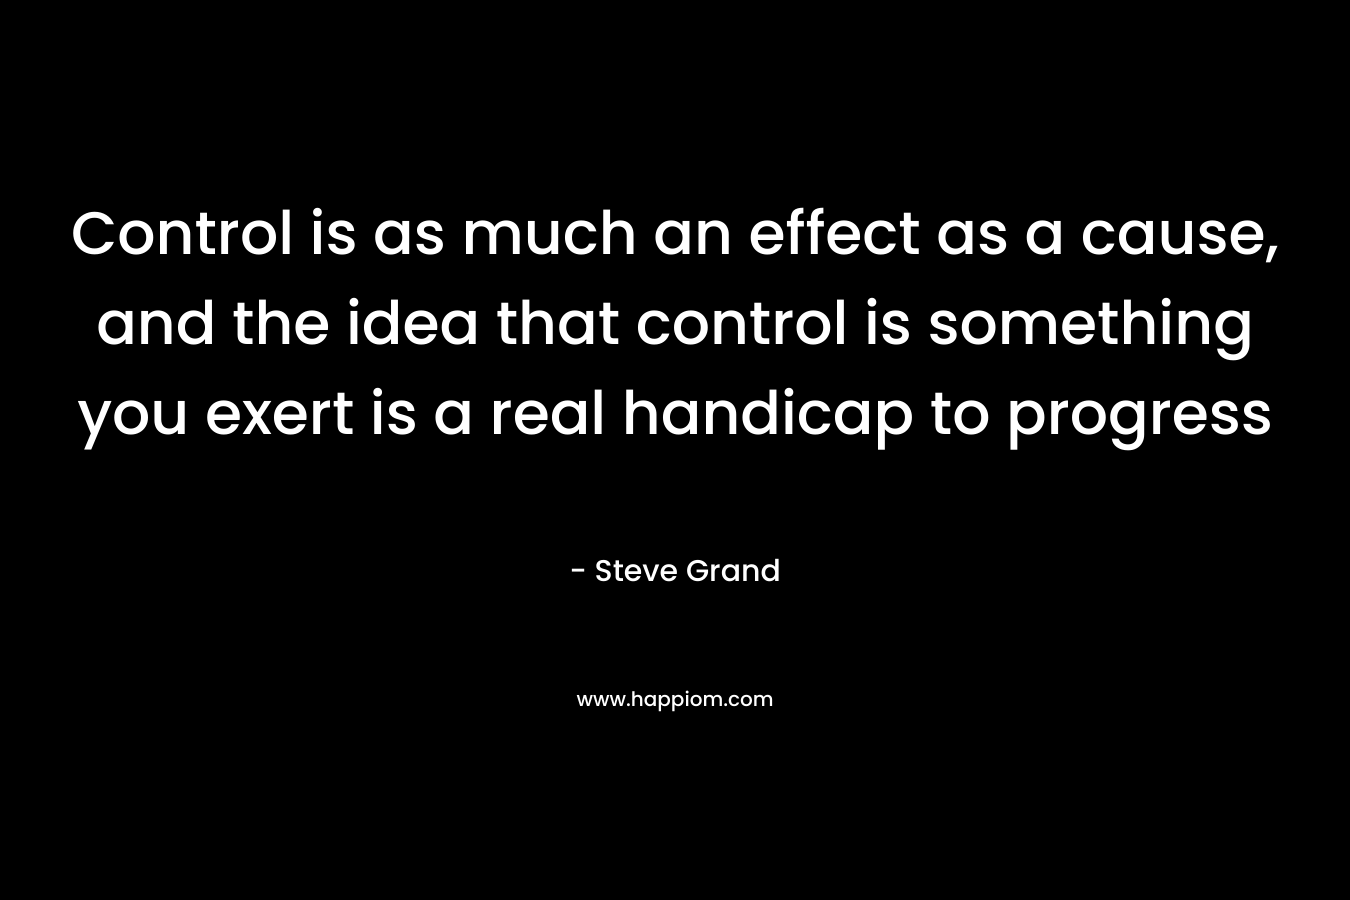 Control is as much an effect as a cause, and the idea that control is something you exert is a real handicap to progress – Steve Grand